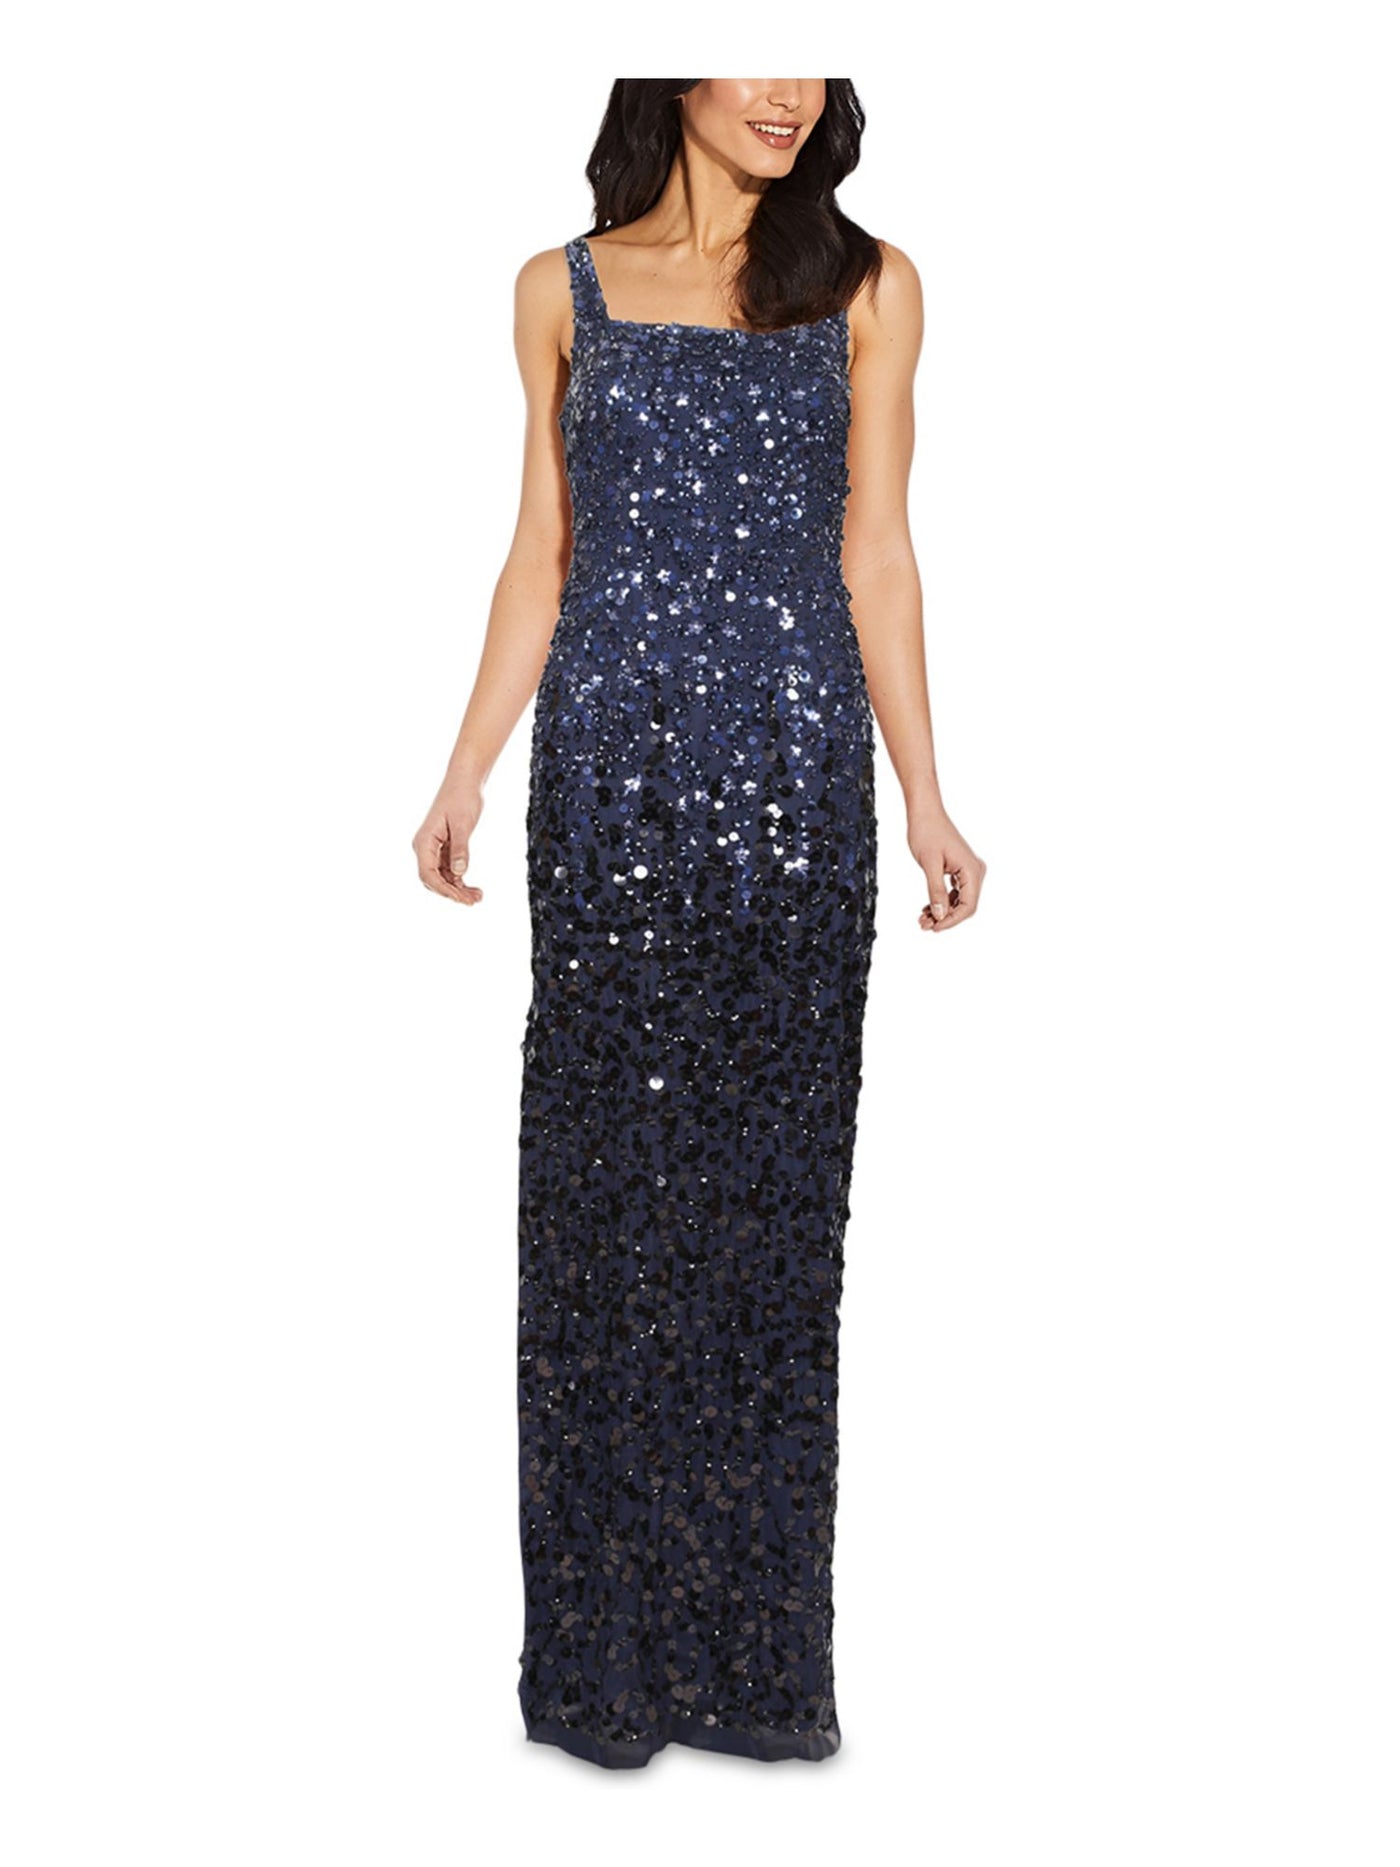 ADRIANNA PAPELL Womens Navy Stretch Sequined Zippered Slitted Lined Sleeveless Square Neck Full-Length Formal Gown Dress 2